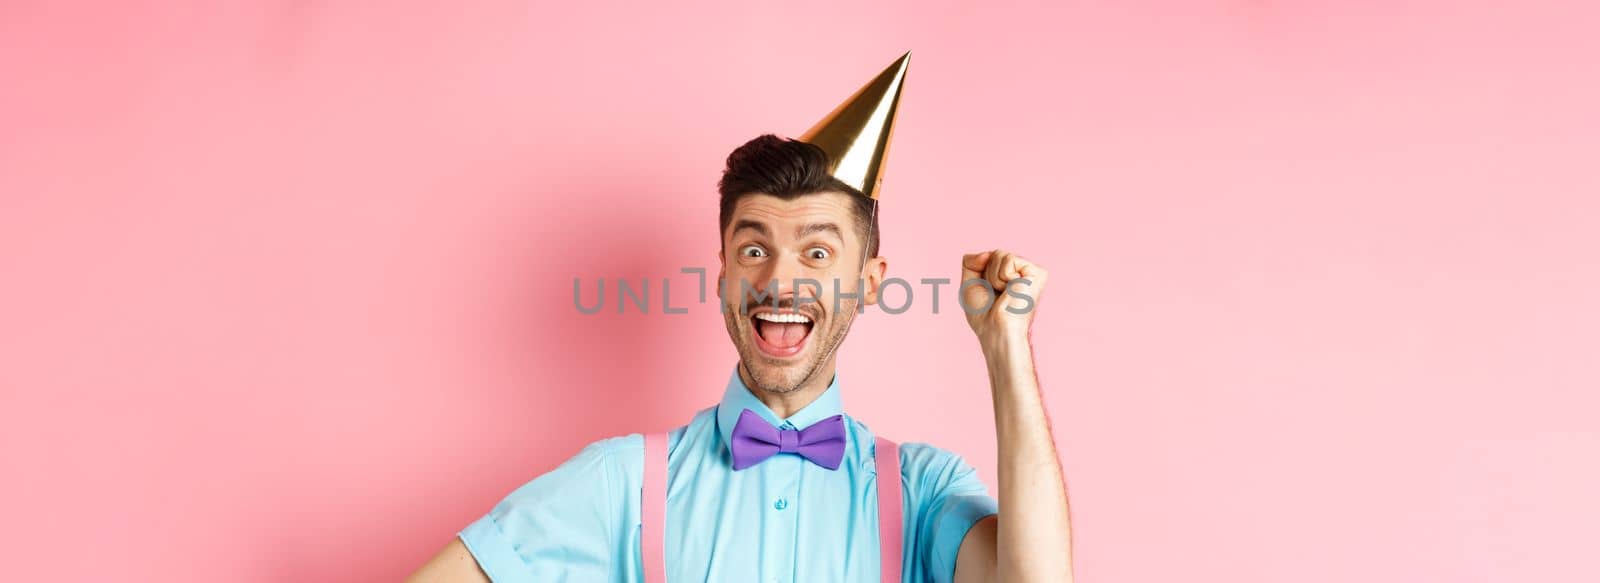 Holidays and celebration concept. Happy birthday boy with moustache and bow-tie celebrating event in party cone hat and festive clothes, raising hand up and shout yes.